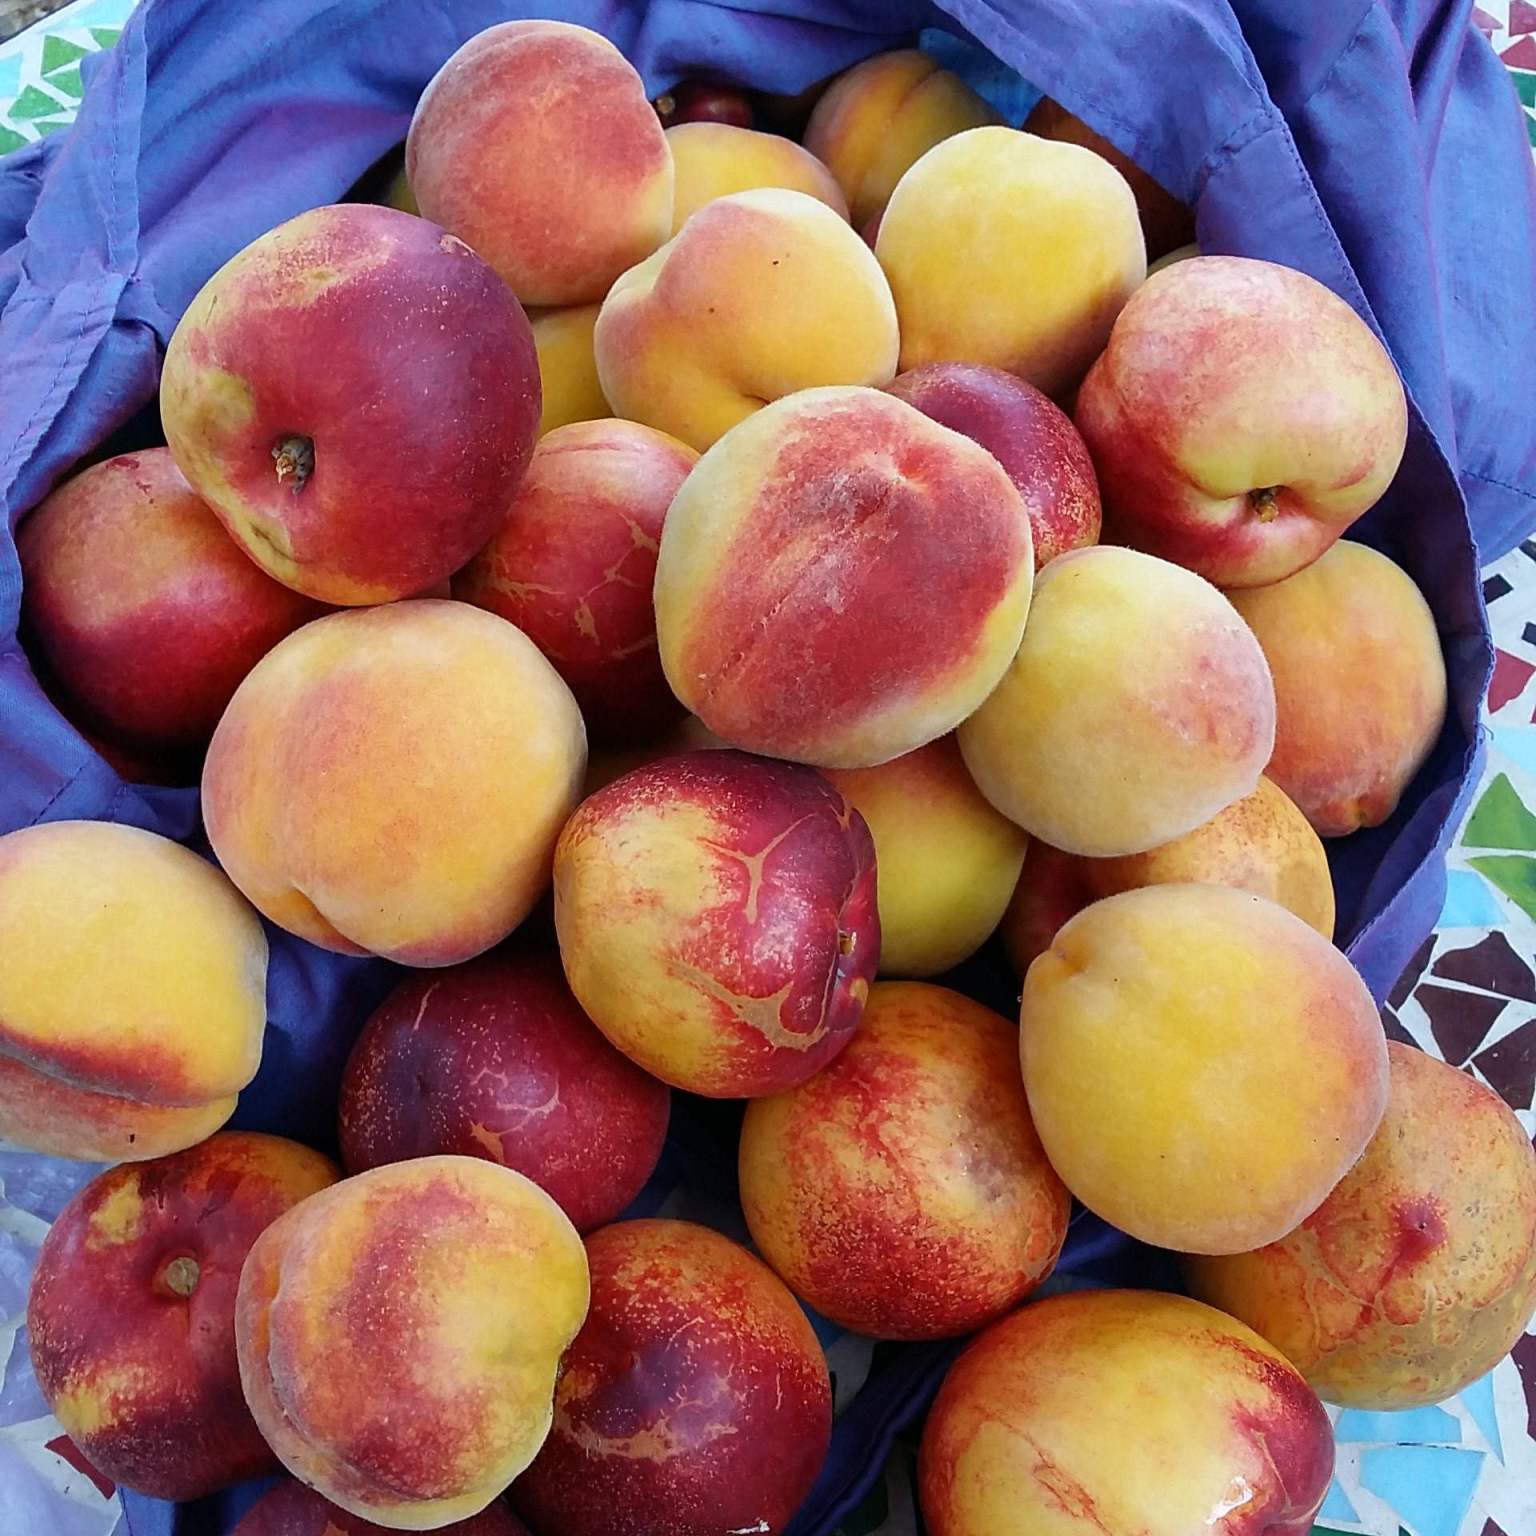 a pile of fresh nectarines and peaches in a purple bag